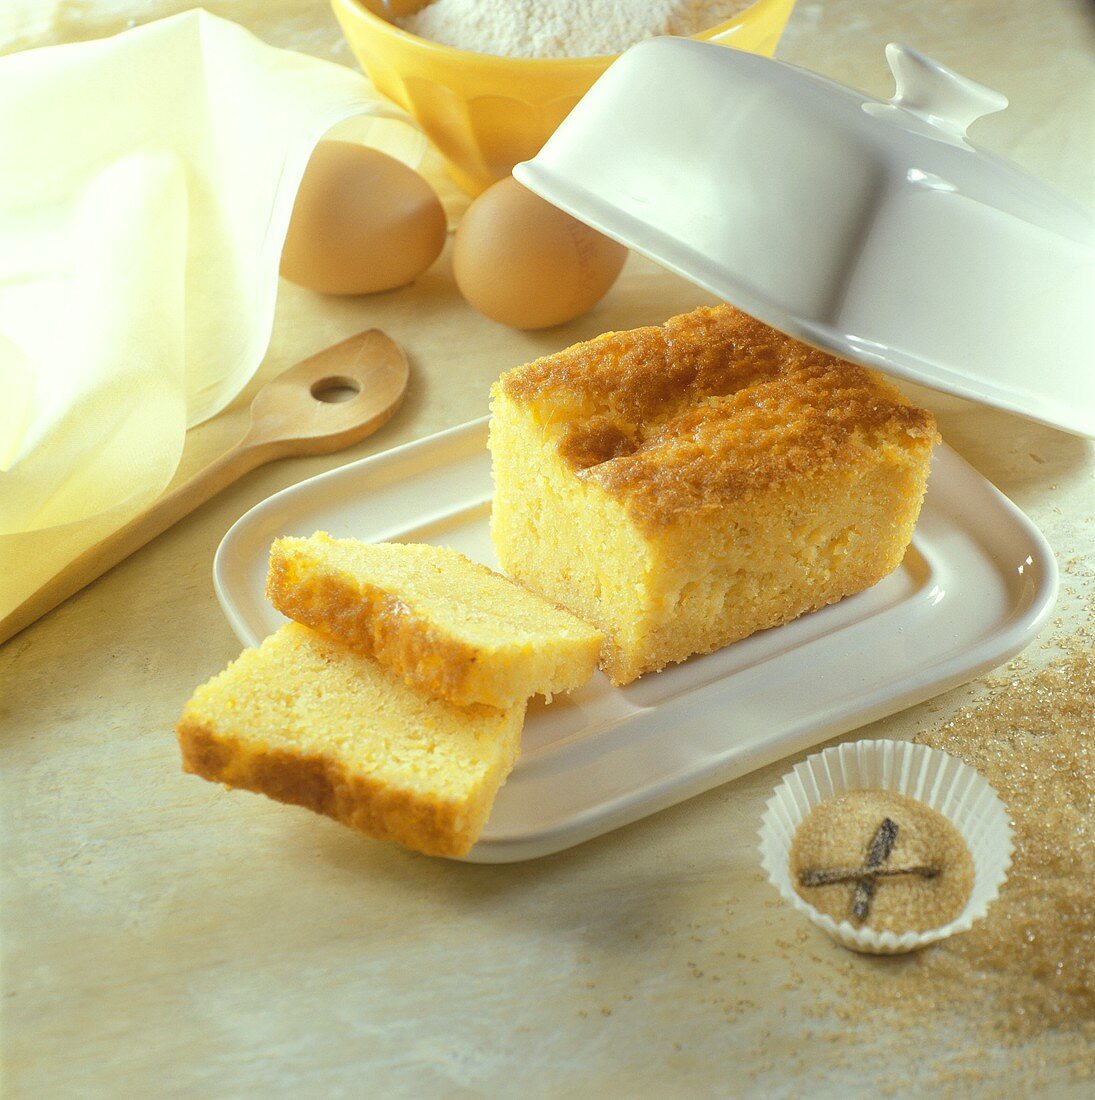 Butter cake surrounded by ingredients